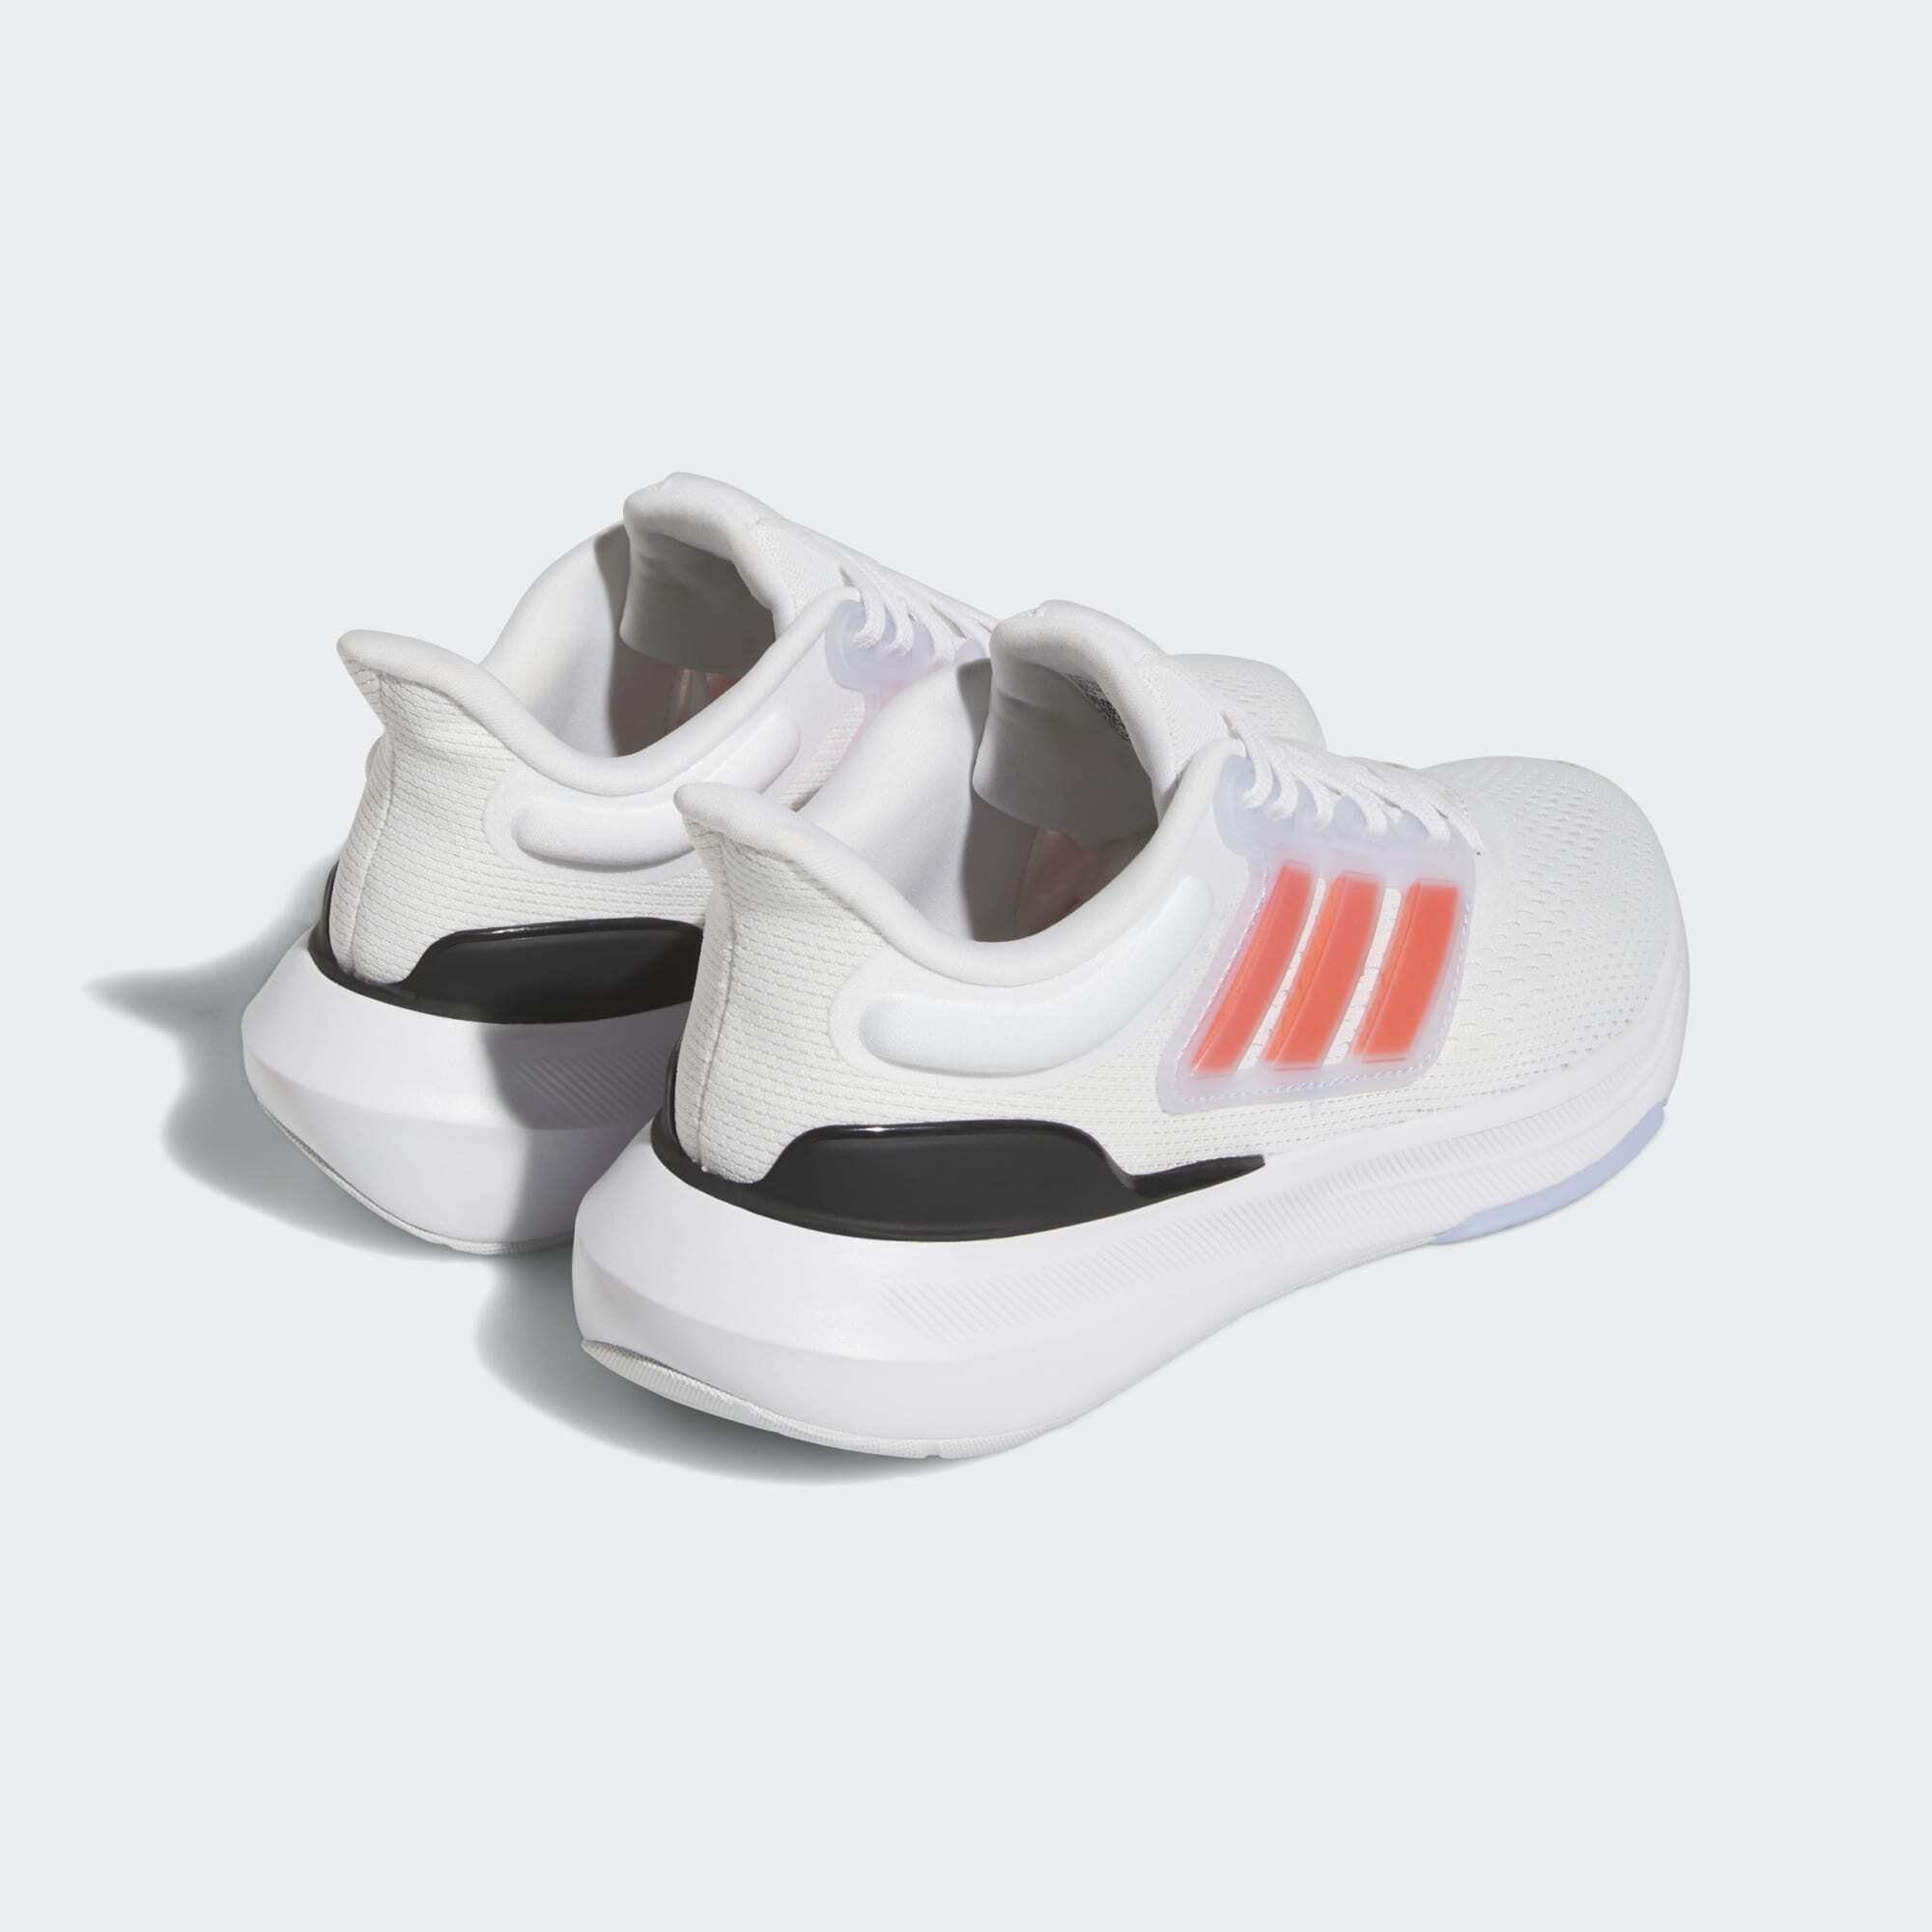 Sneaker Sportswear Crystal ULTRABOUNCE Cloud Red White SCHUH adidas White JUNIOR / Solar /